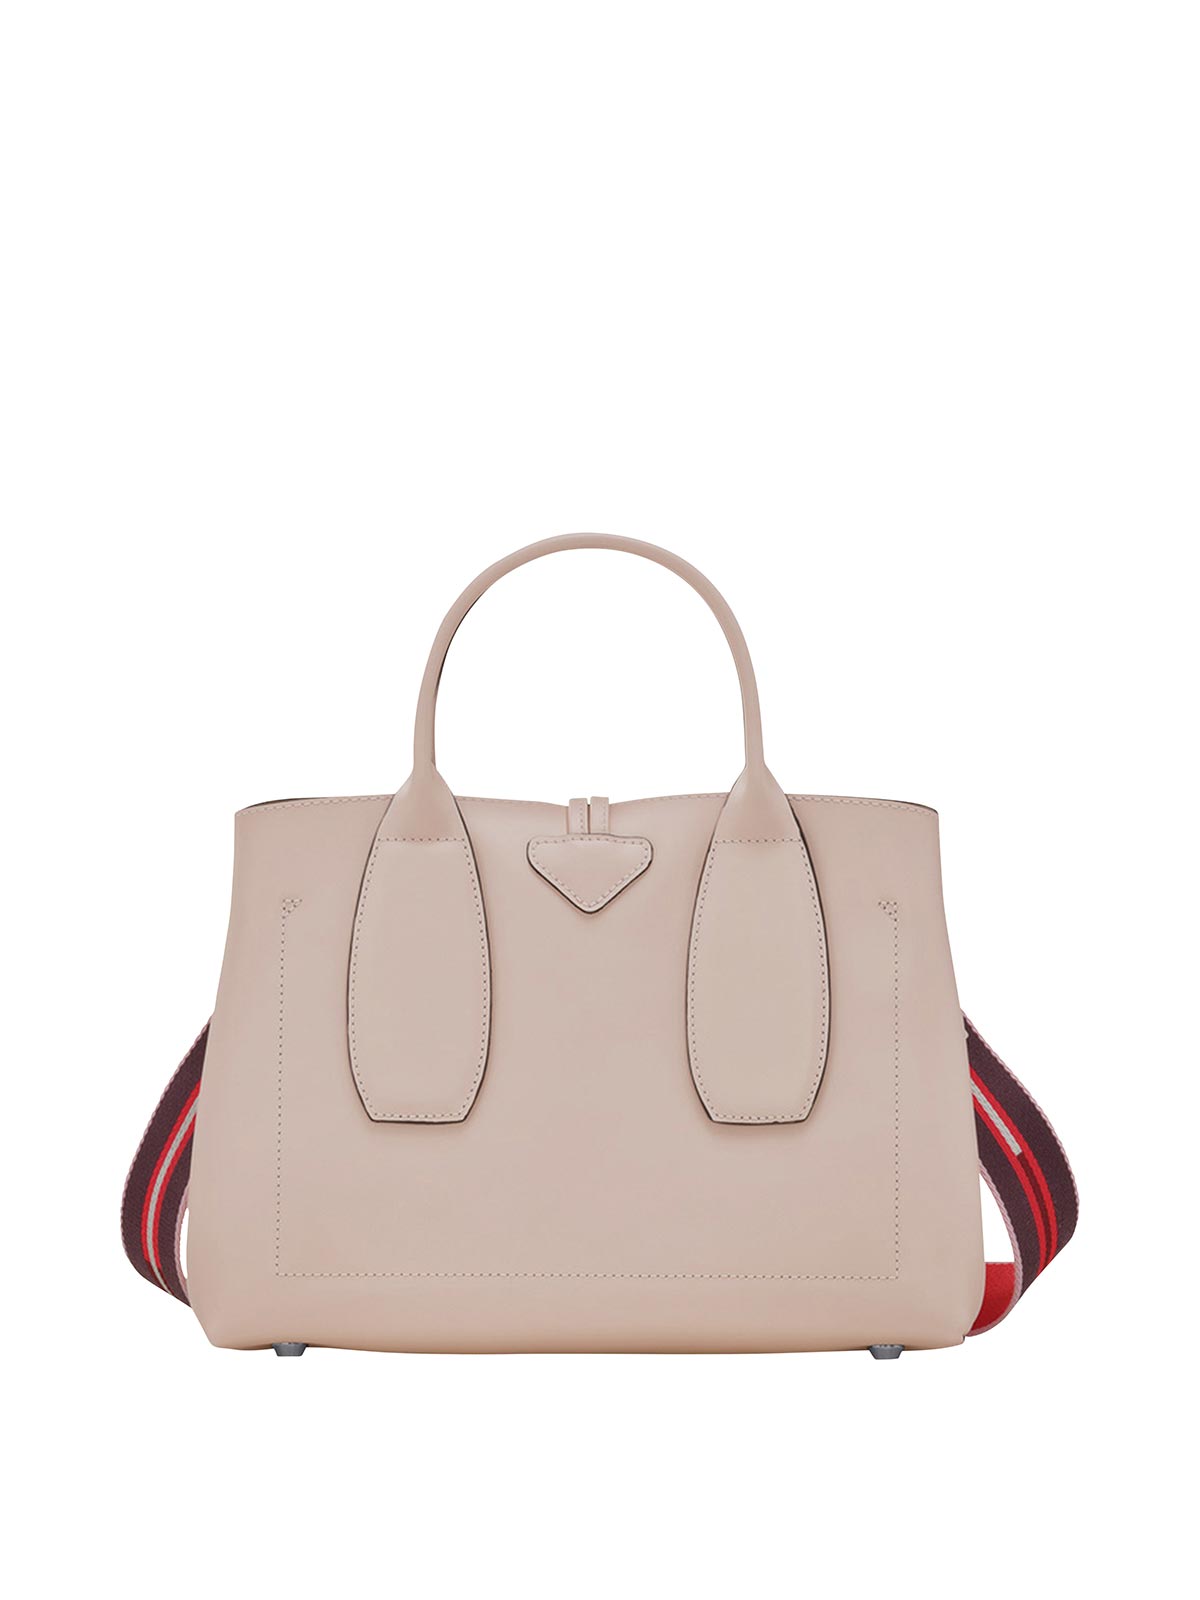 Longchamp Shopping Bag In Pink With Top Handles In Neutral